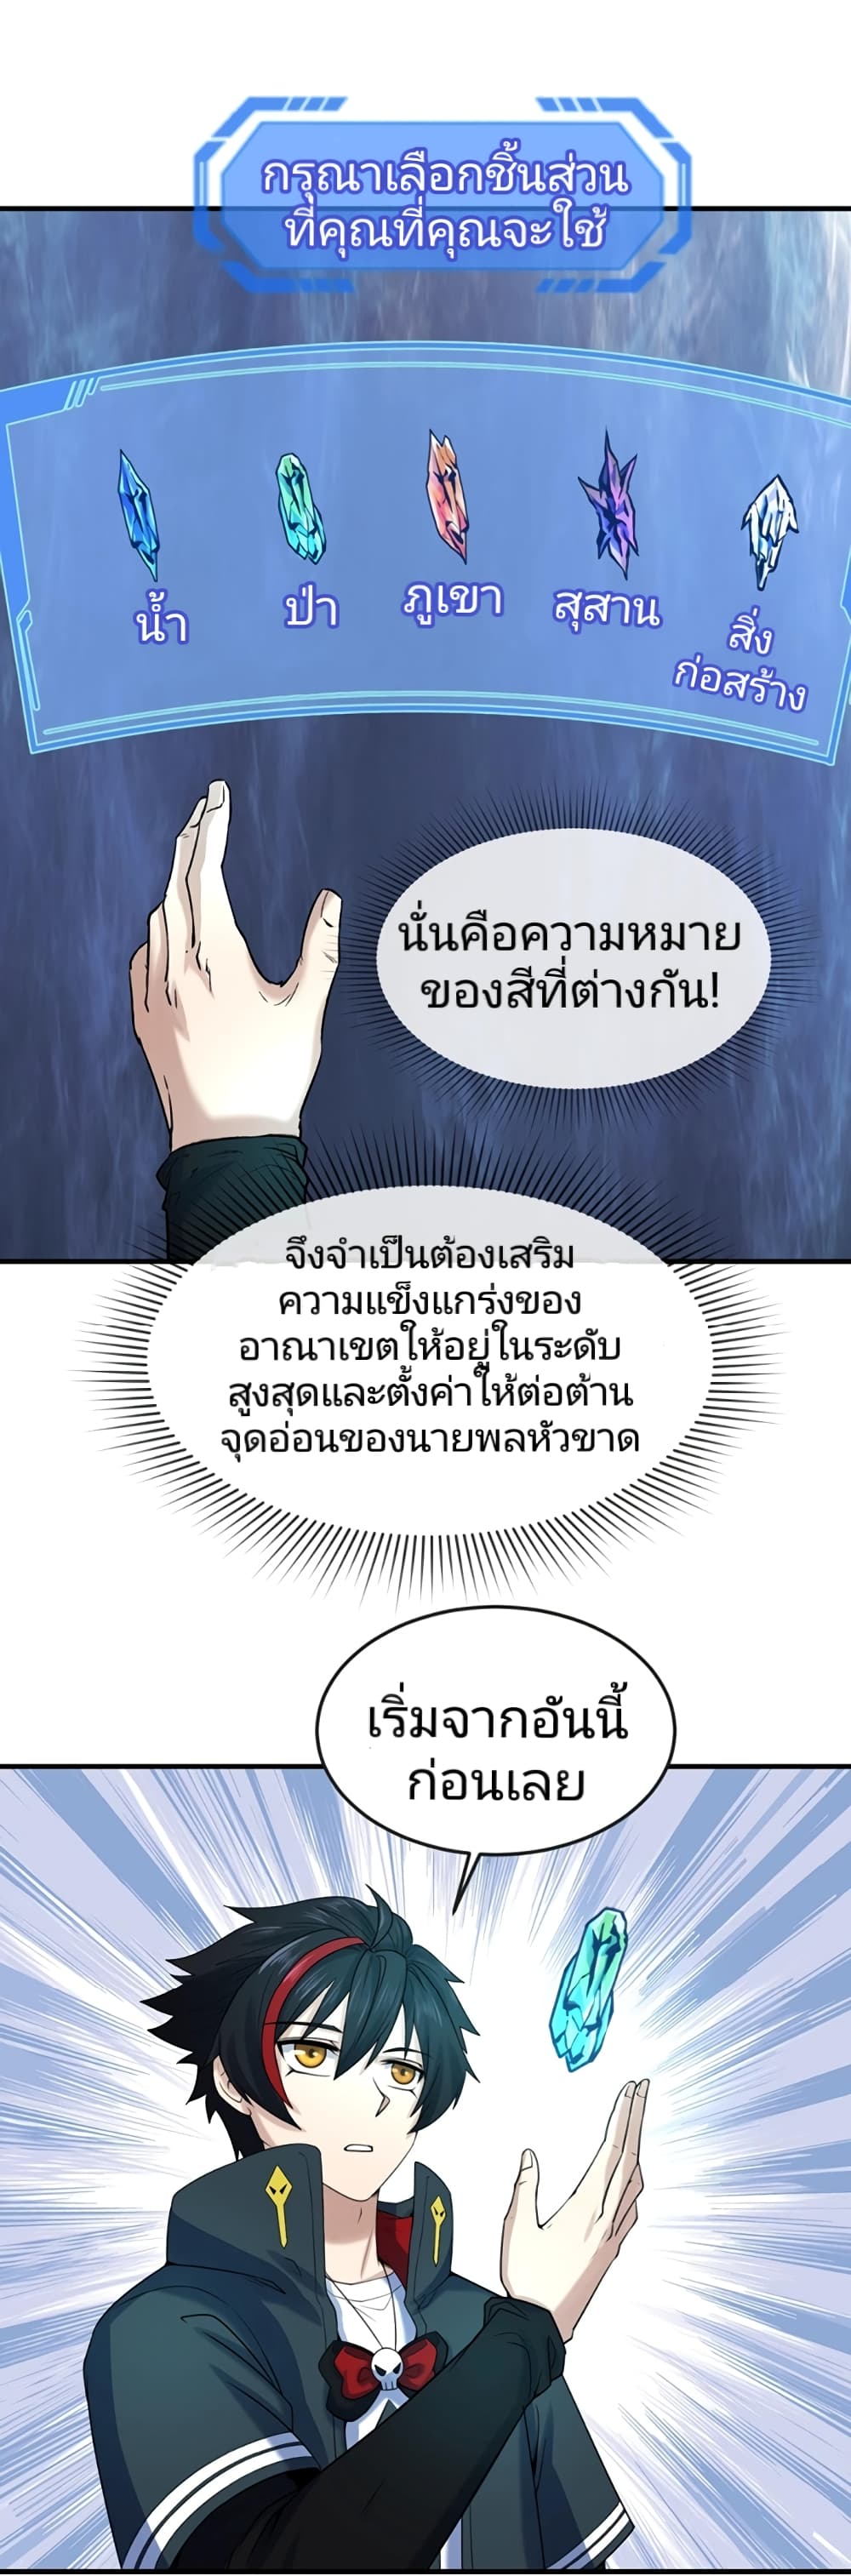 The Age of Ghost Spirits à¸à¸­à¸à¸à¸µà¹ 23 (32)